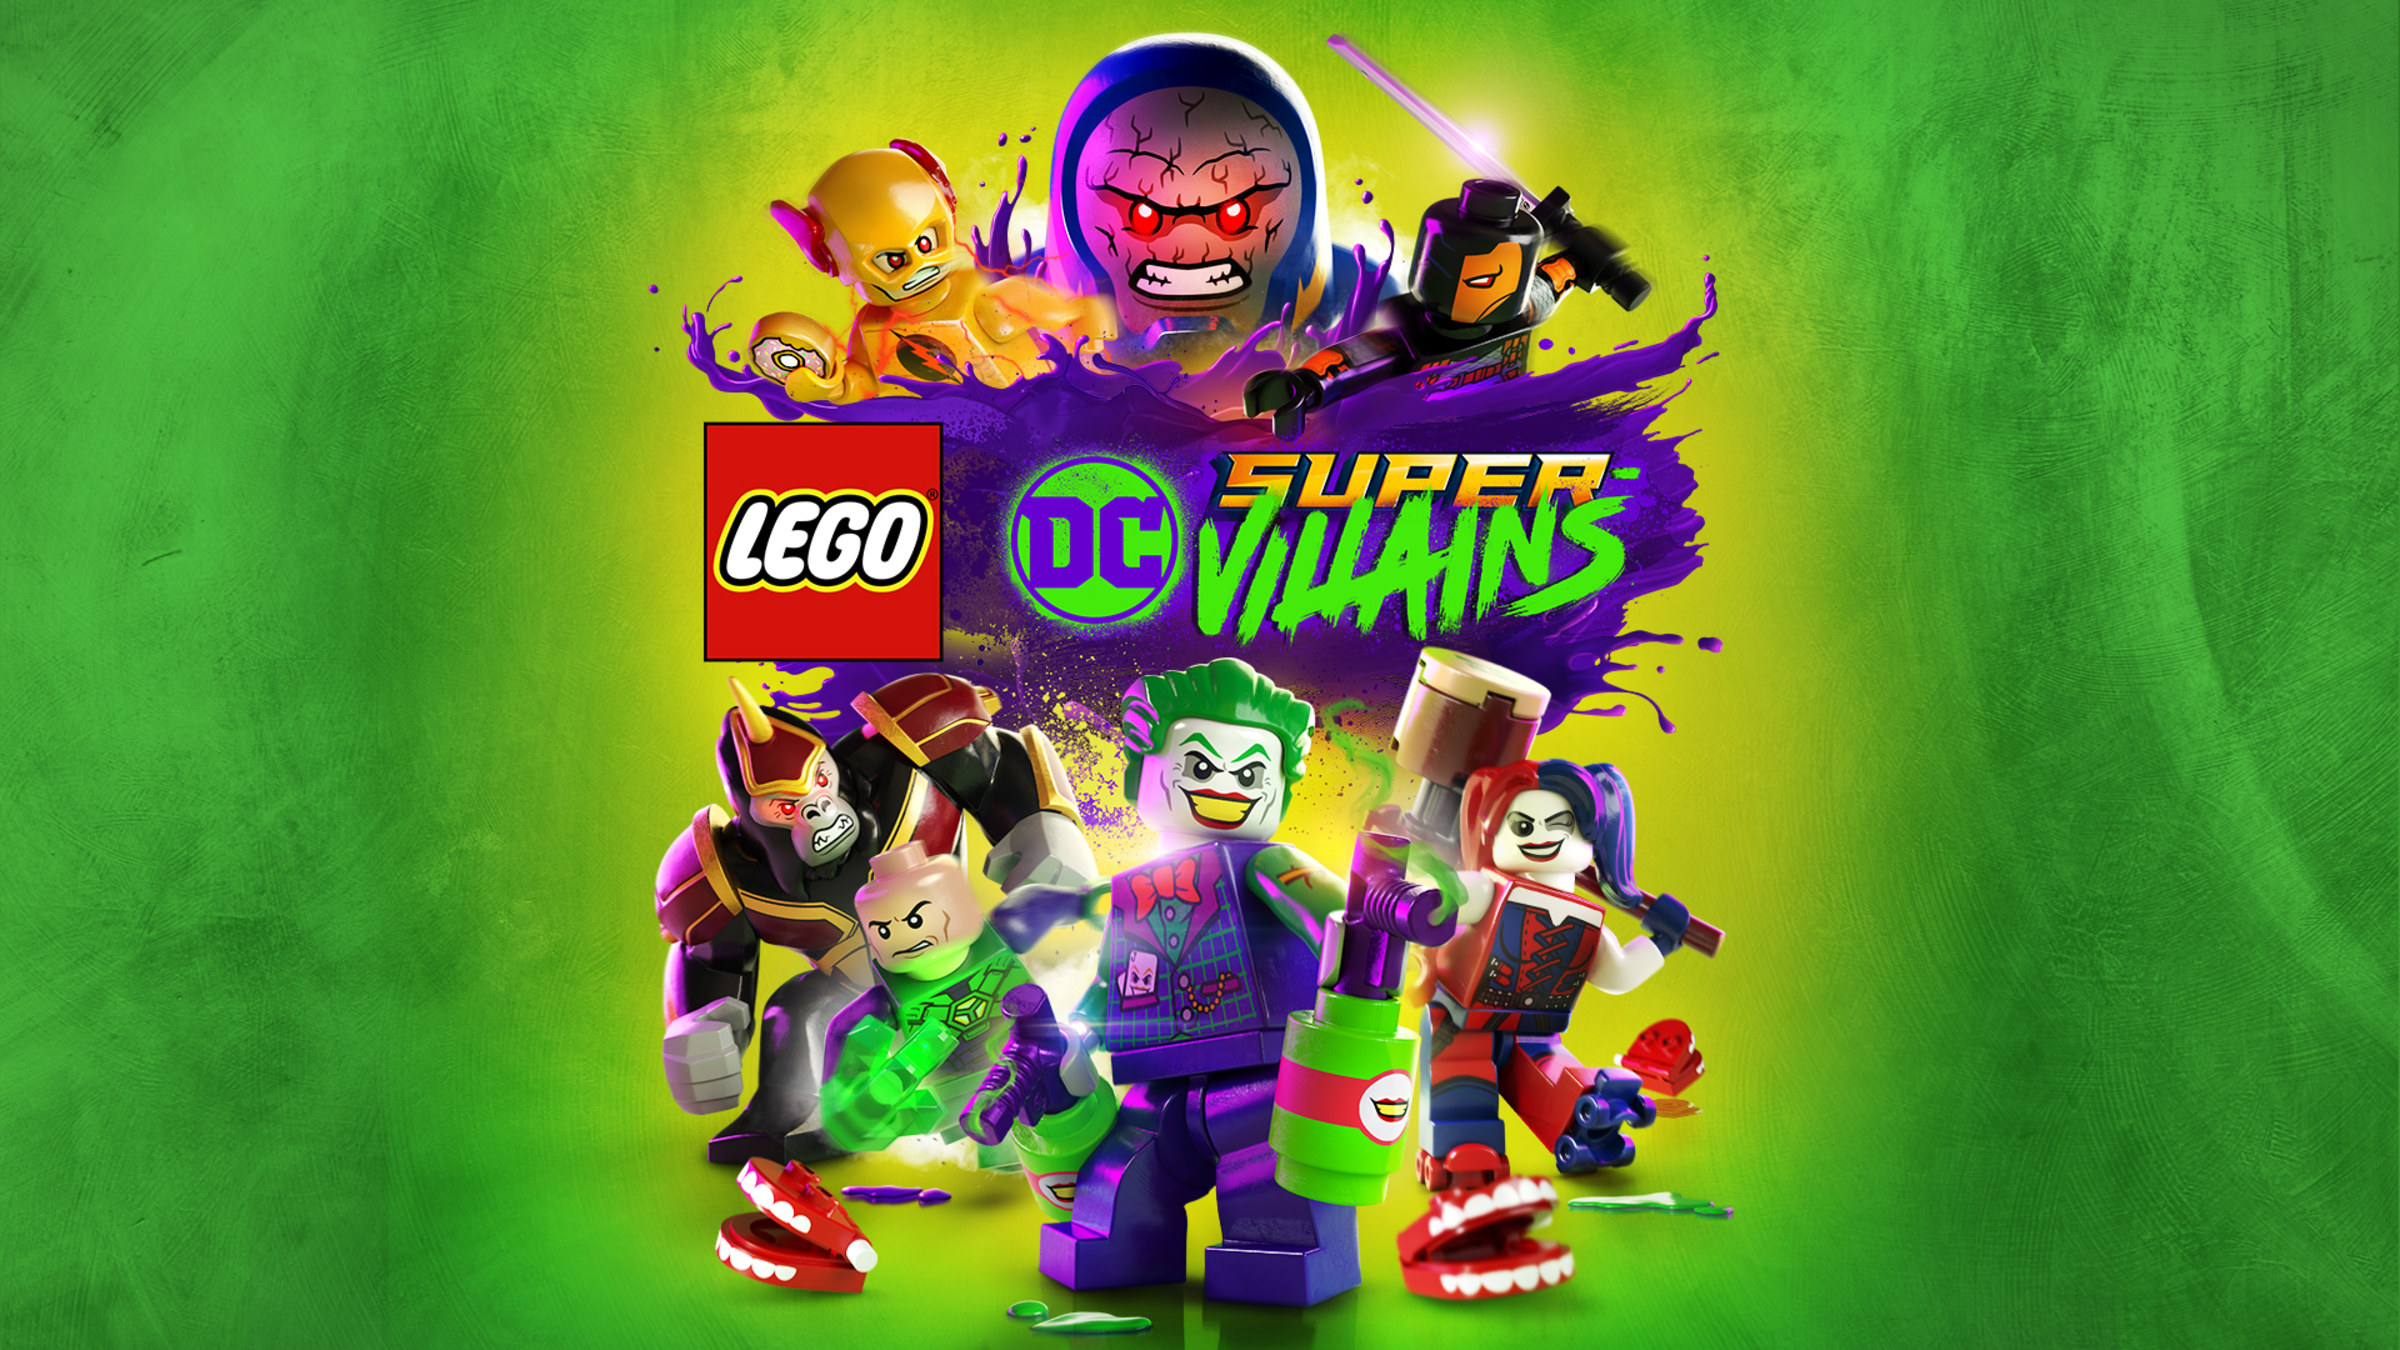 Series The Lego Batman Movie - The Villains, From LEGO Coll…